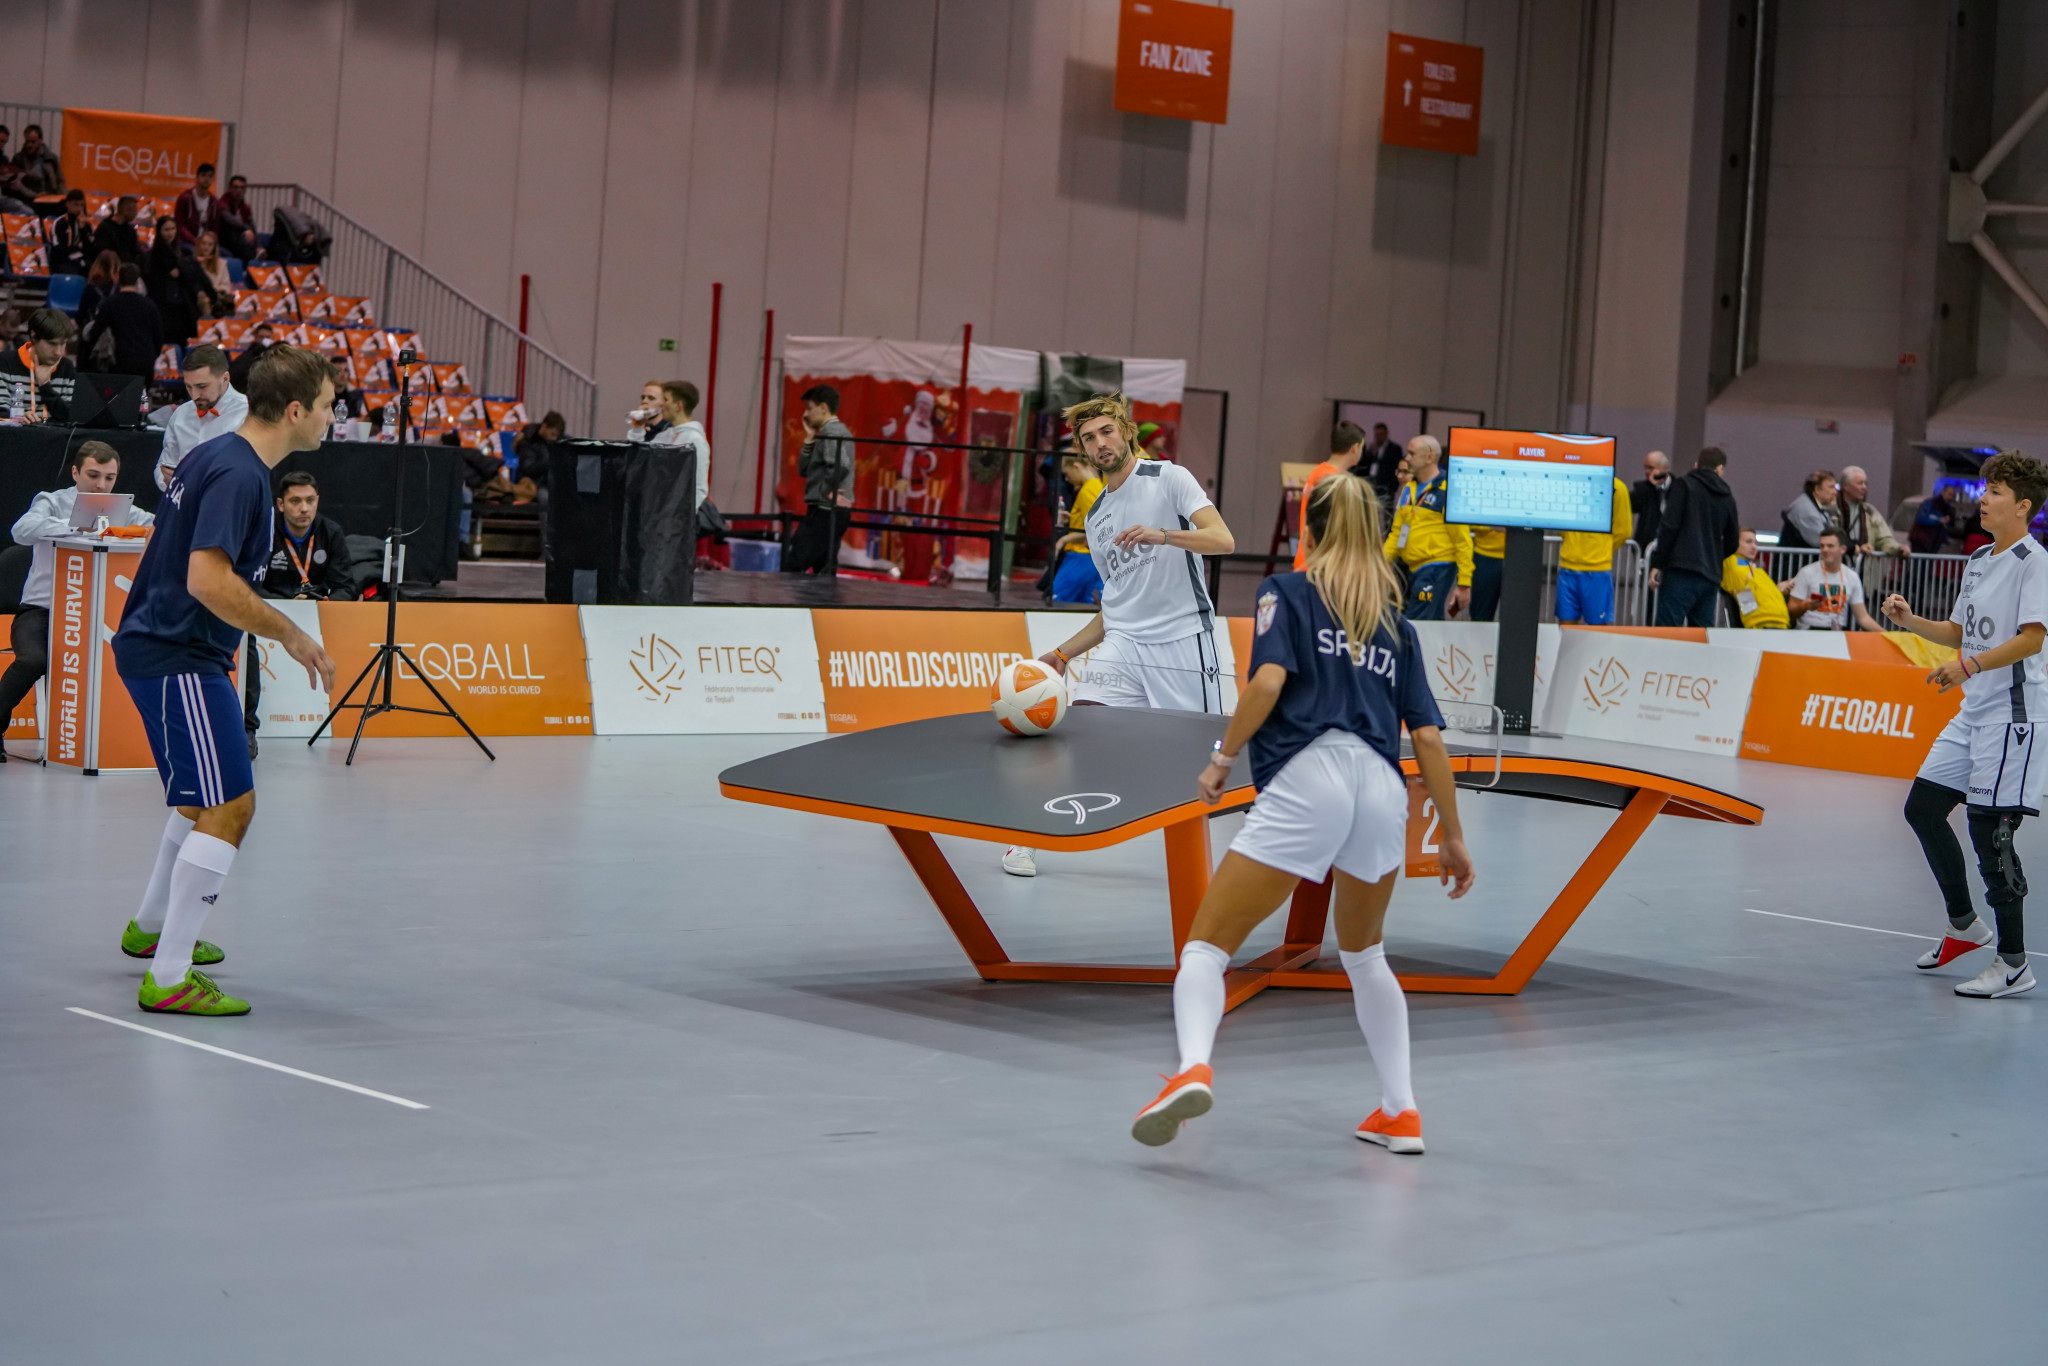 Competition took place during the day in the doubles and mixed doubles events ©FITEQ